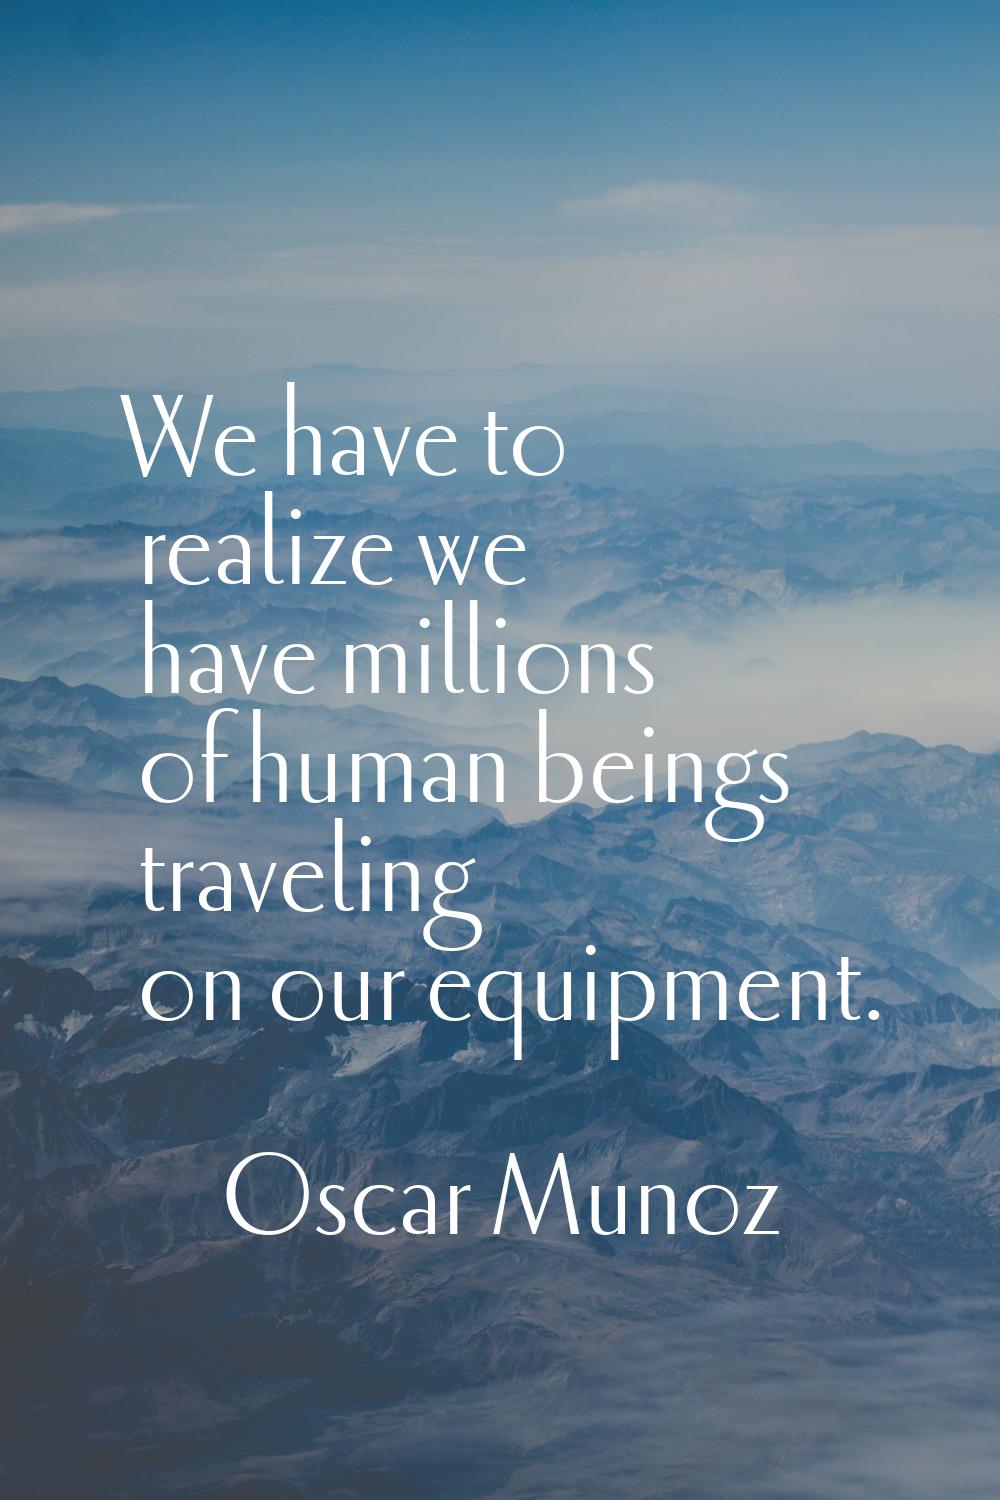 We have to realize we have millions of human beings traveling on our equipment.